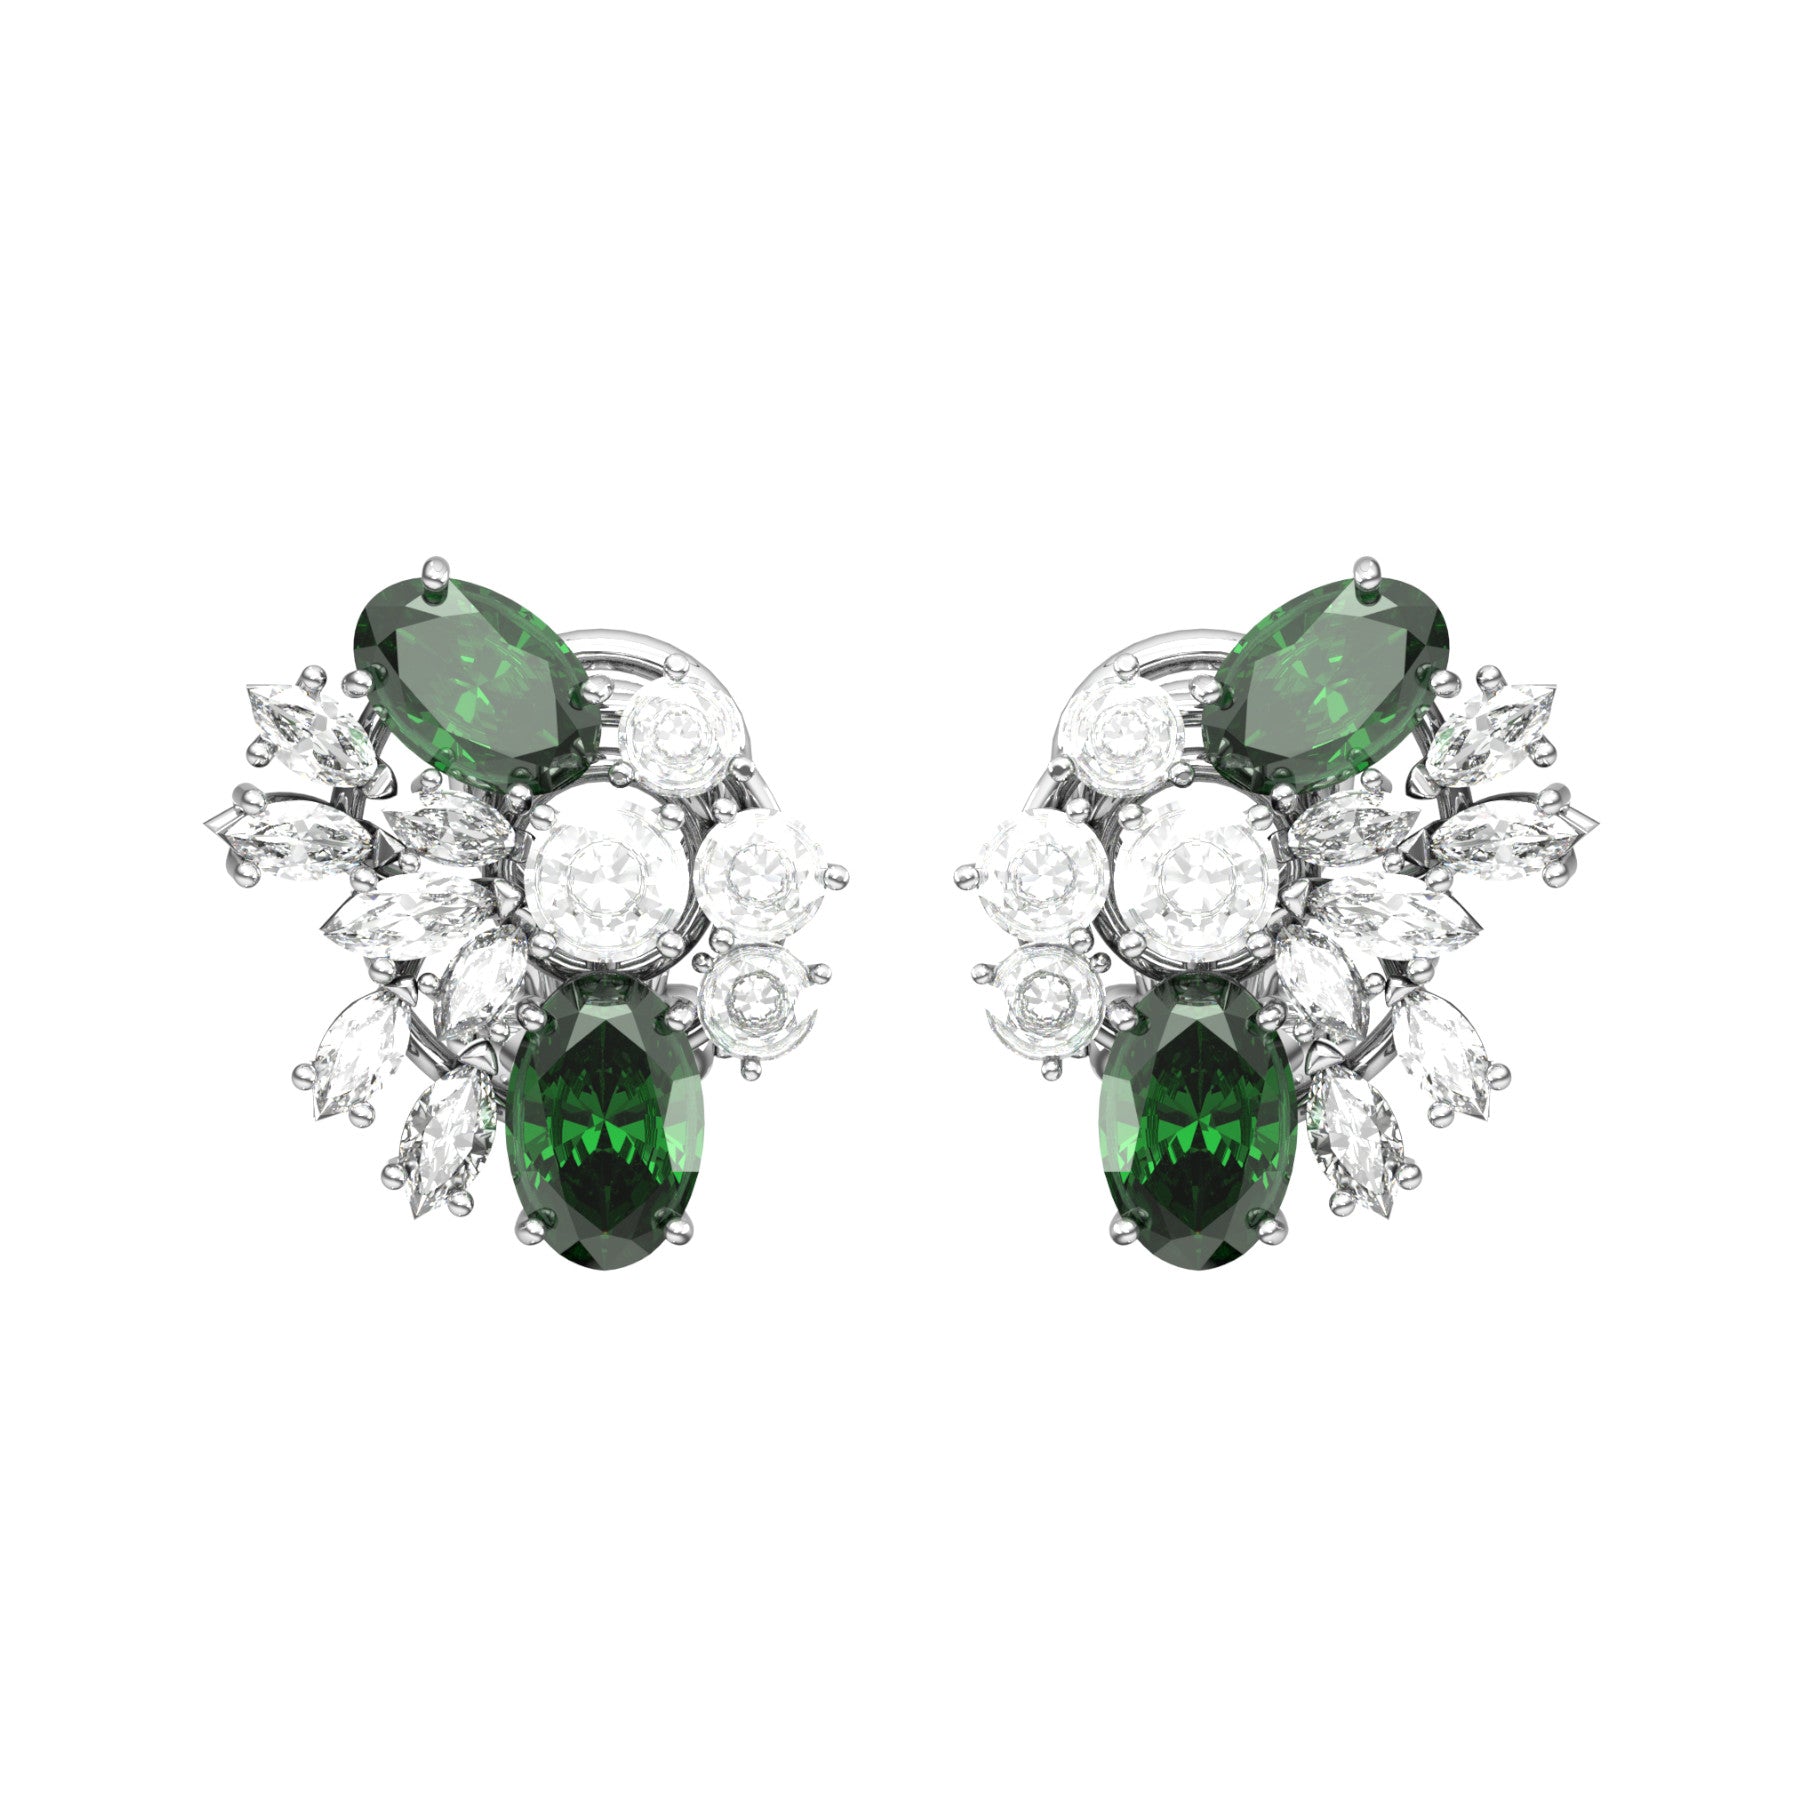 arya earrings,natural oval emeralds, natural round and navette diamonds, 18K white gold, weight abot 5,0 g (0.18 oz), length 15,6 mm max